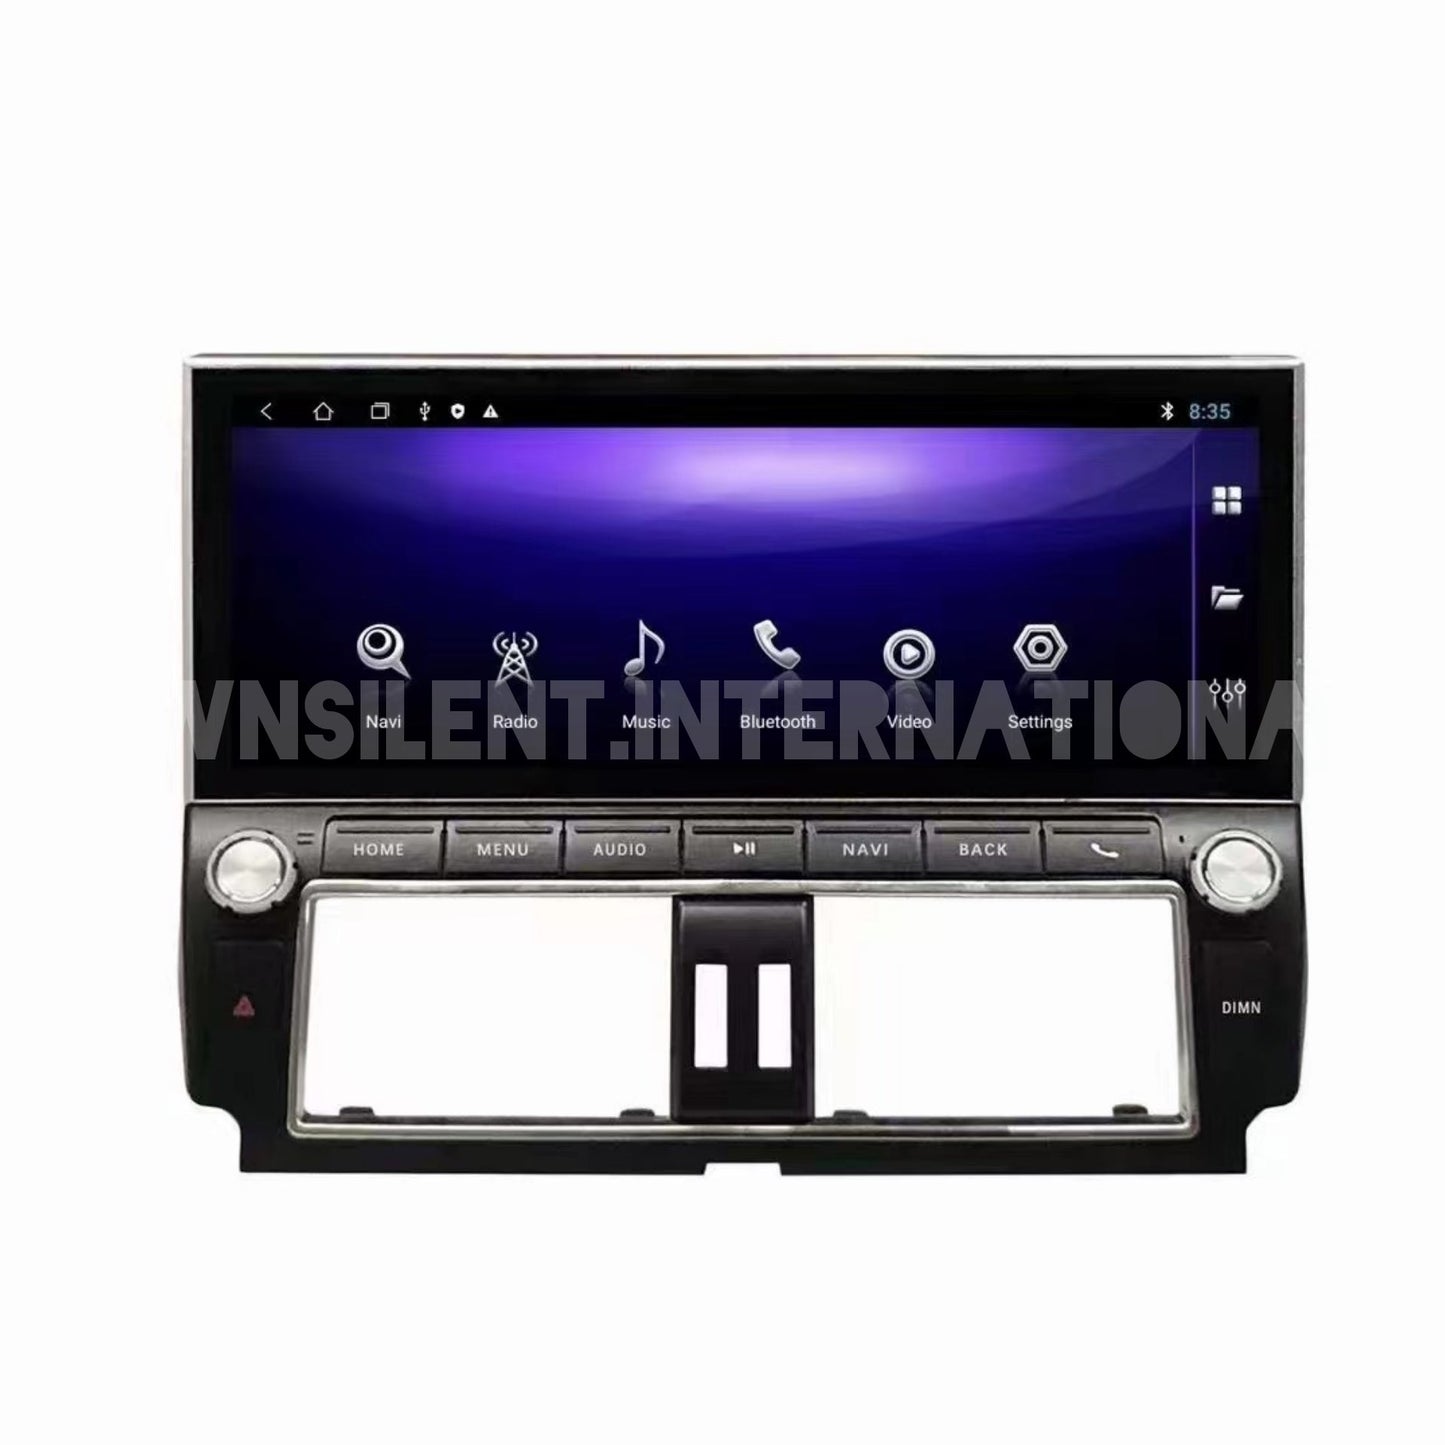 12.3 Inch android screen with 4Gb ram, Android Auto and Apple Carplay for Prado 2014 and above models